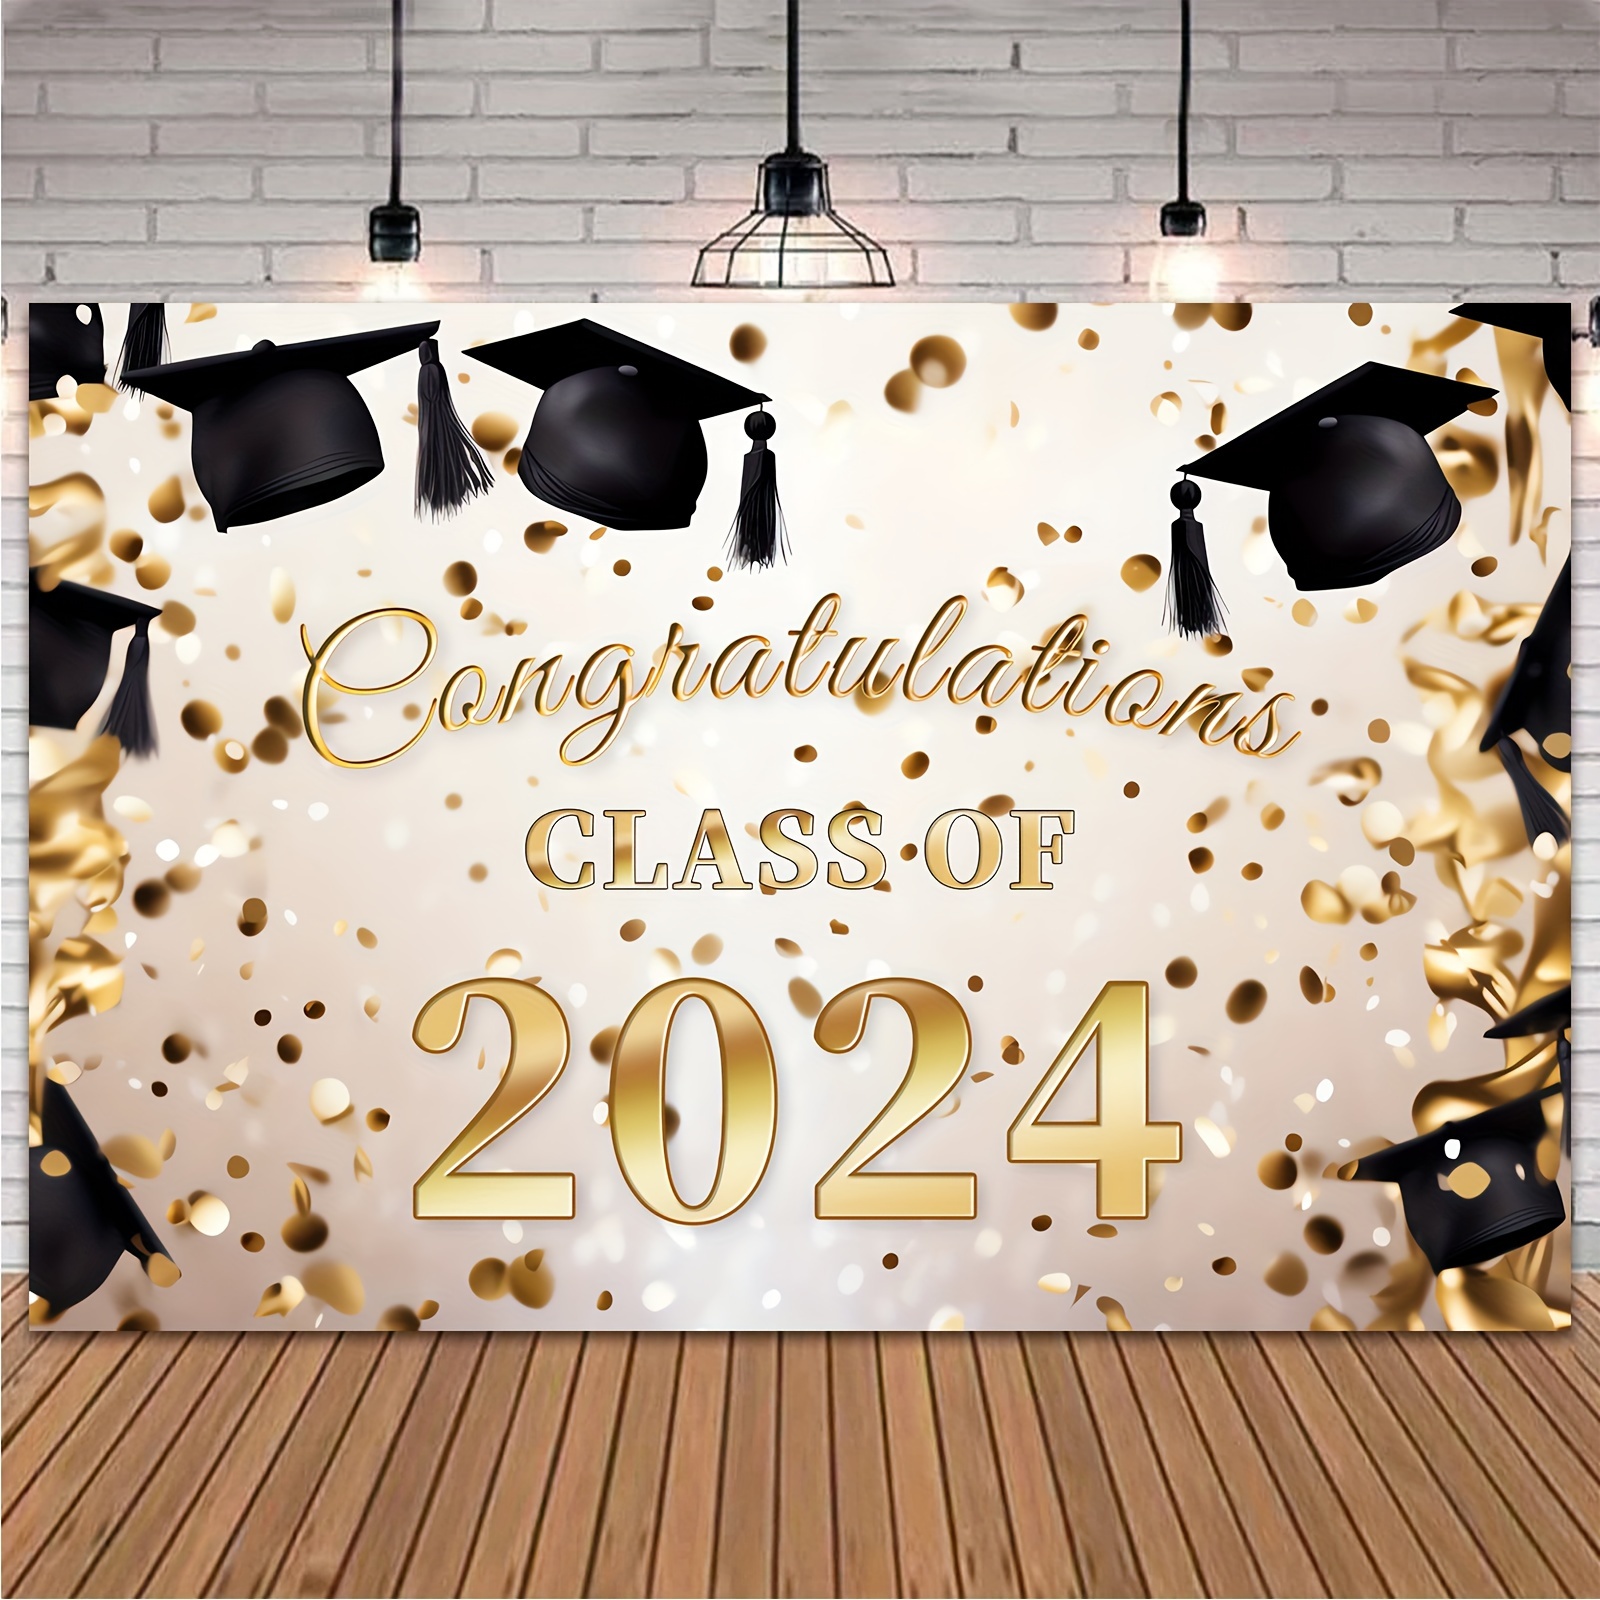 Green and Gold Graduation Decorations 2024 Congrats Grad Banner Backdrop Graduation Decorations Class of 2024 Graduation Photo Booth Props College